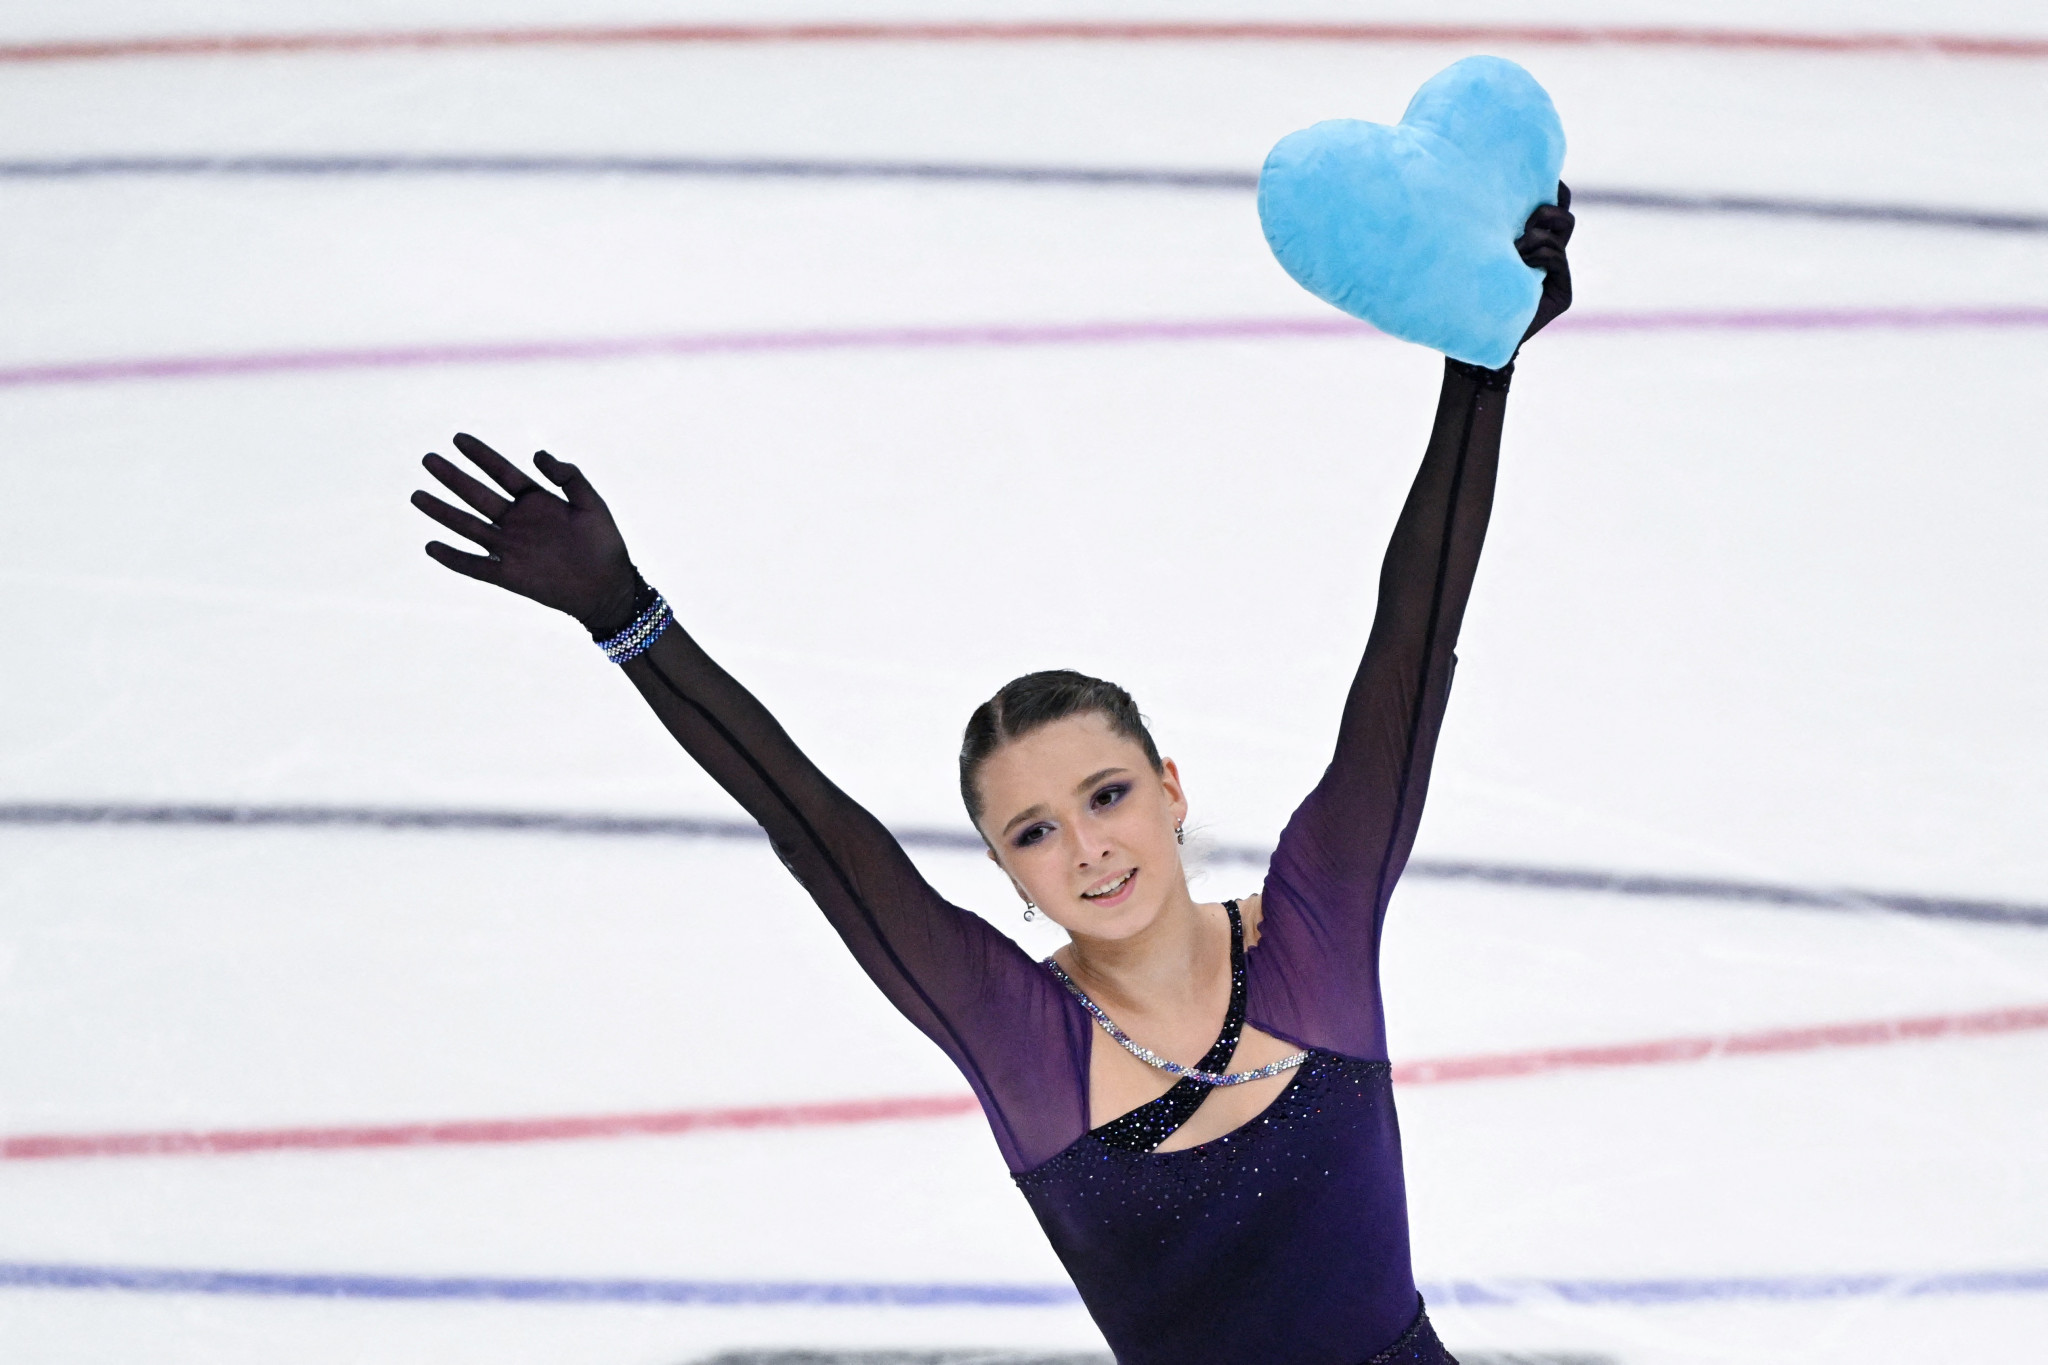 Teenage figure skater Kamila Valieva is at the centre of a doping scandal exclusively revealed by insidethegames ©Getty Images